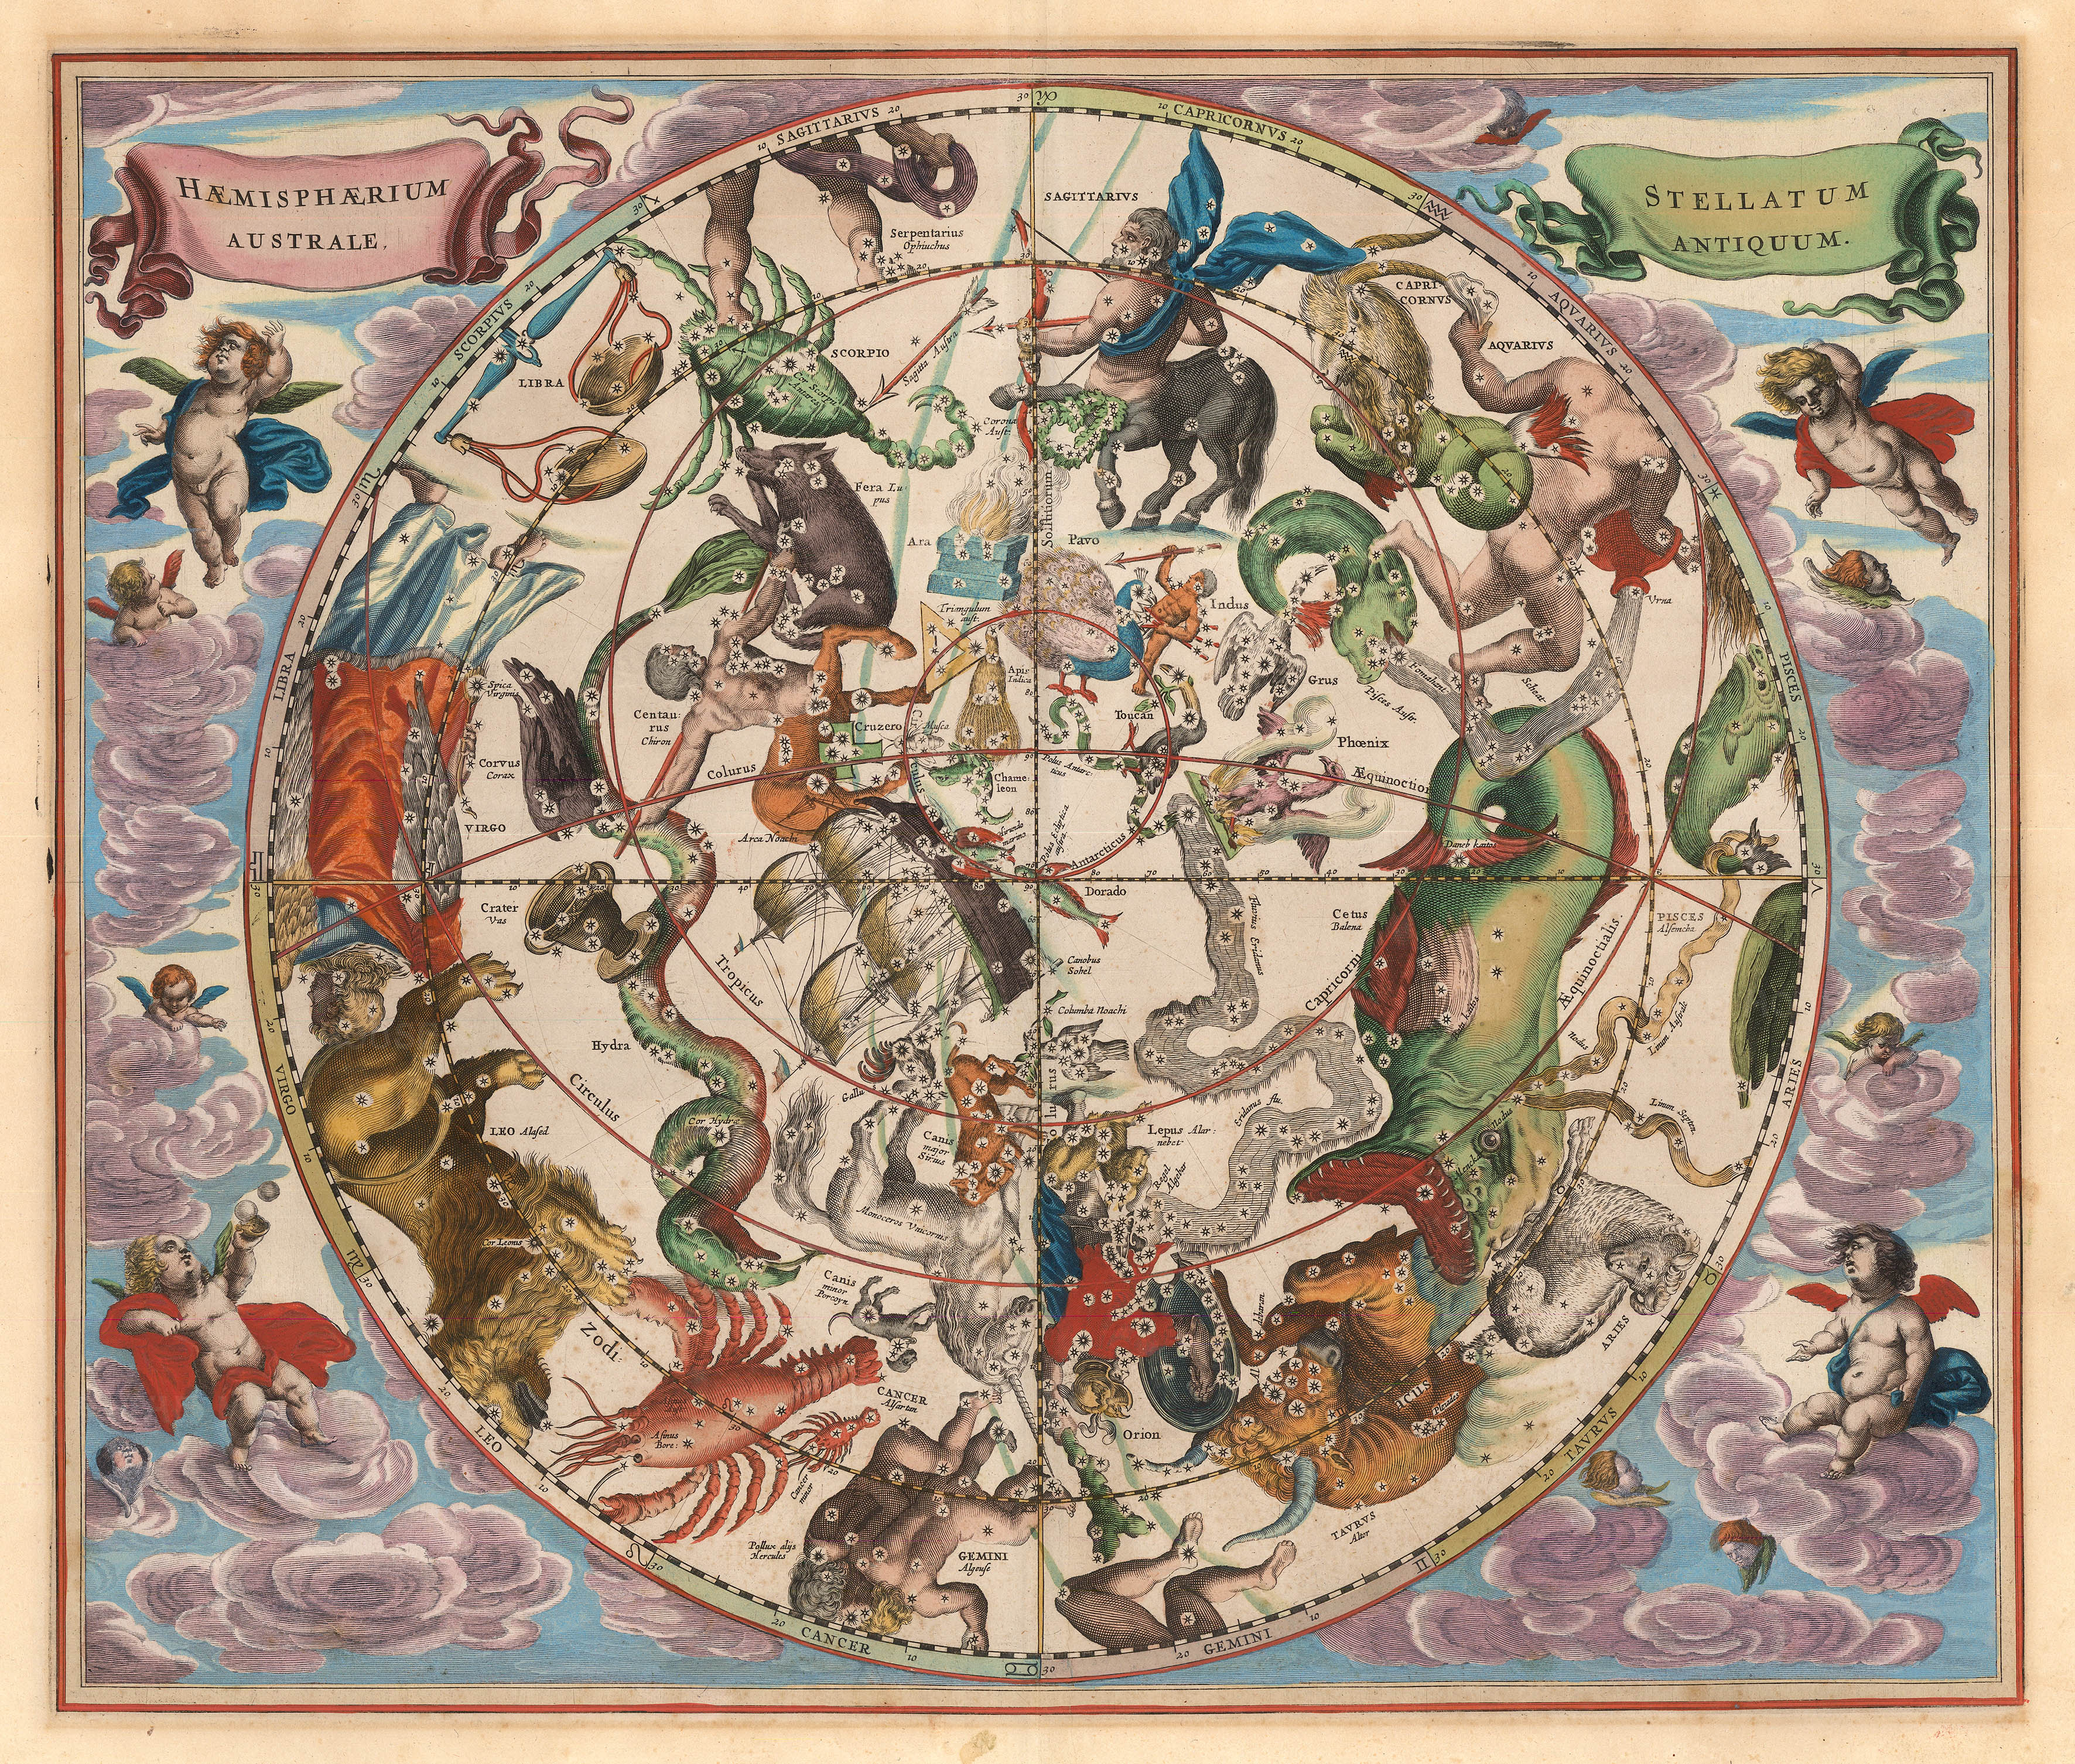 An antique map of the southern hemisphere’s constellations